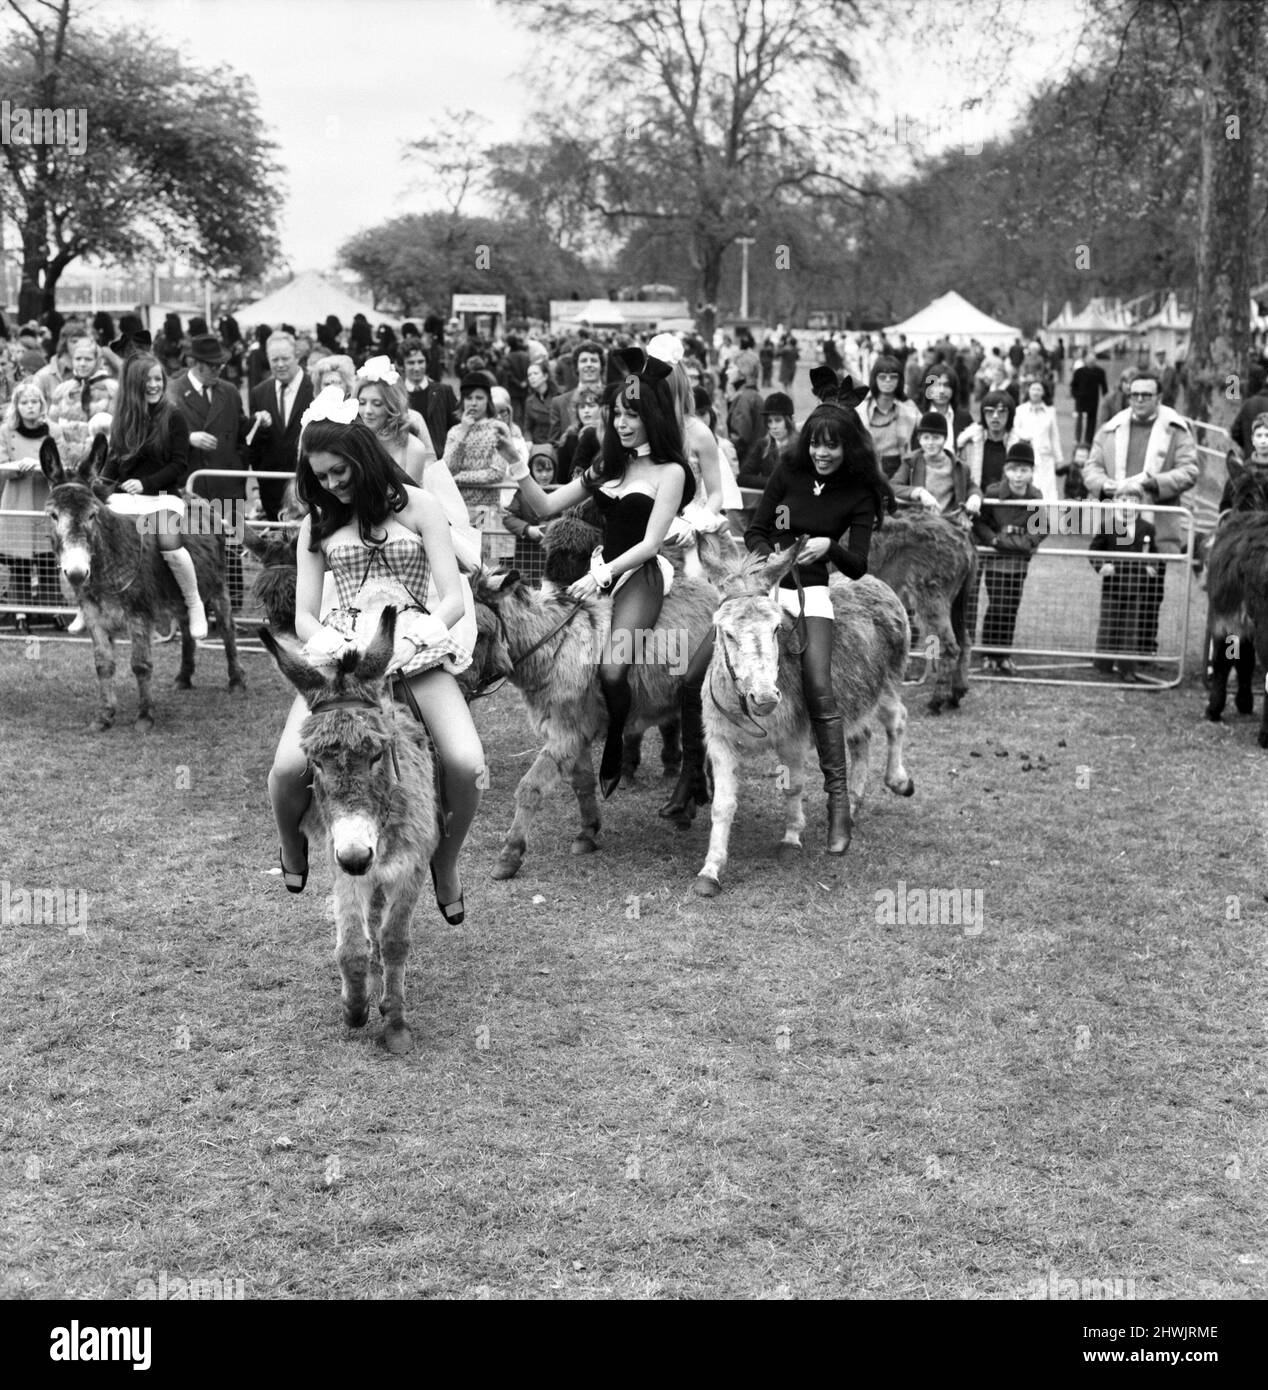 Donkey Derby held for charity at Festival Gardens. Bunny girls and Penthouse pets in a race which was declared as dead heat by the organisers. April 1972 72-04585-005 Stock Photo